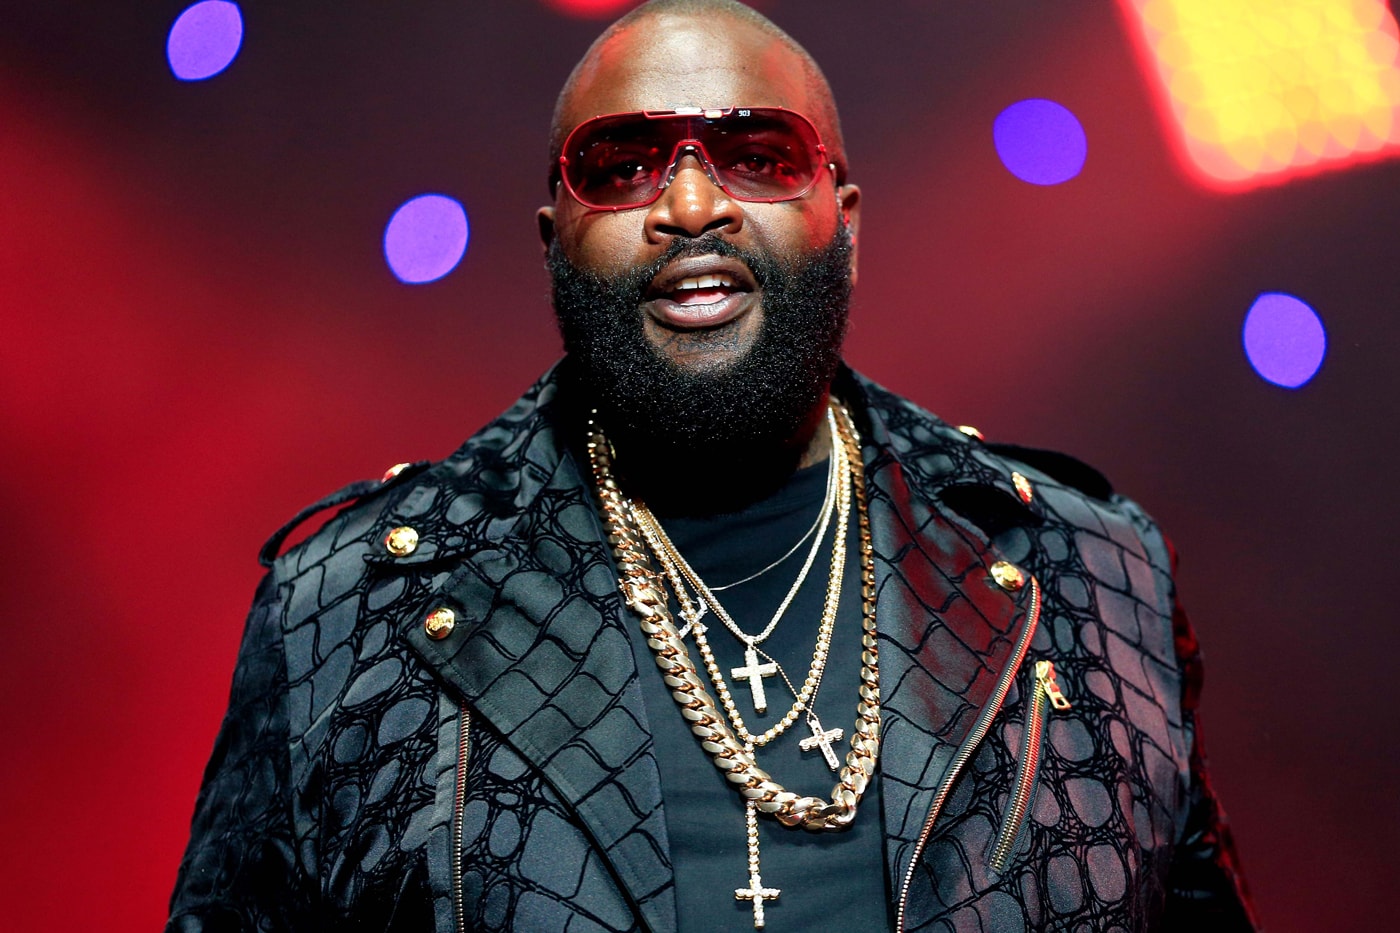 Rick Ross featuring T.I. – 9 Piece